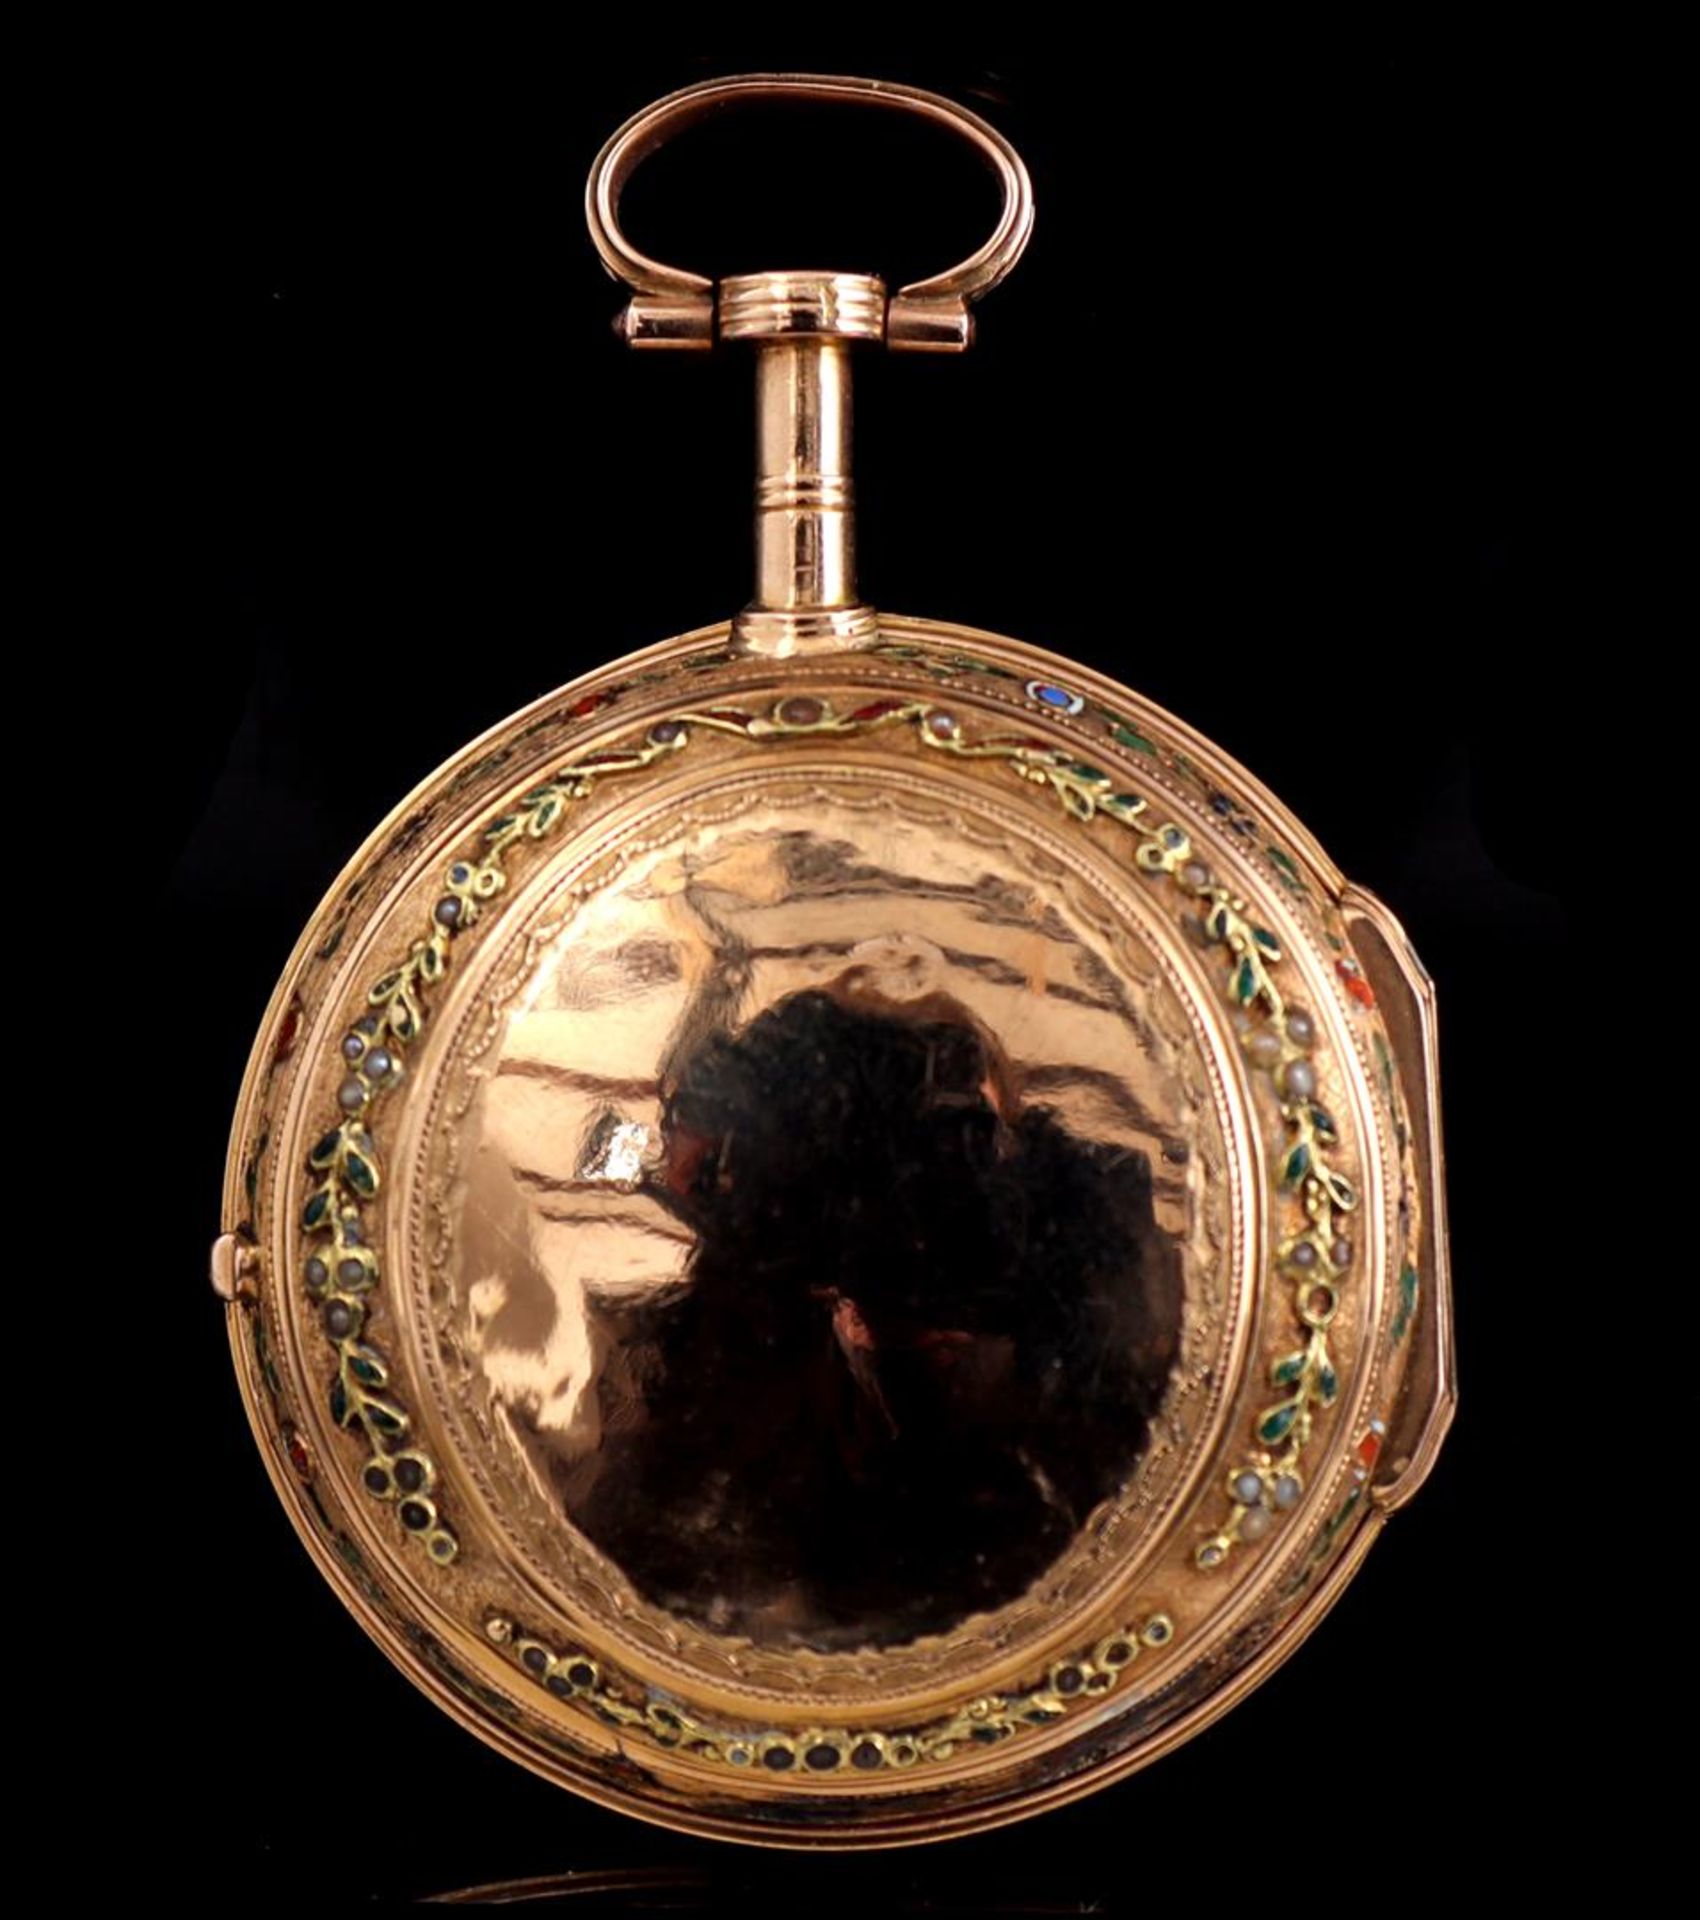 Romilly Paris pocket watch - Image 2 of 4